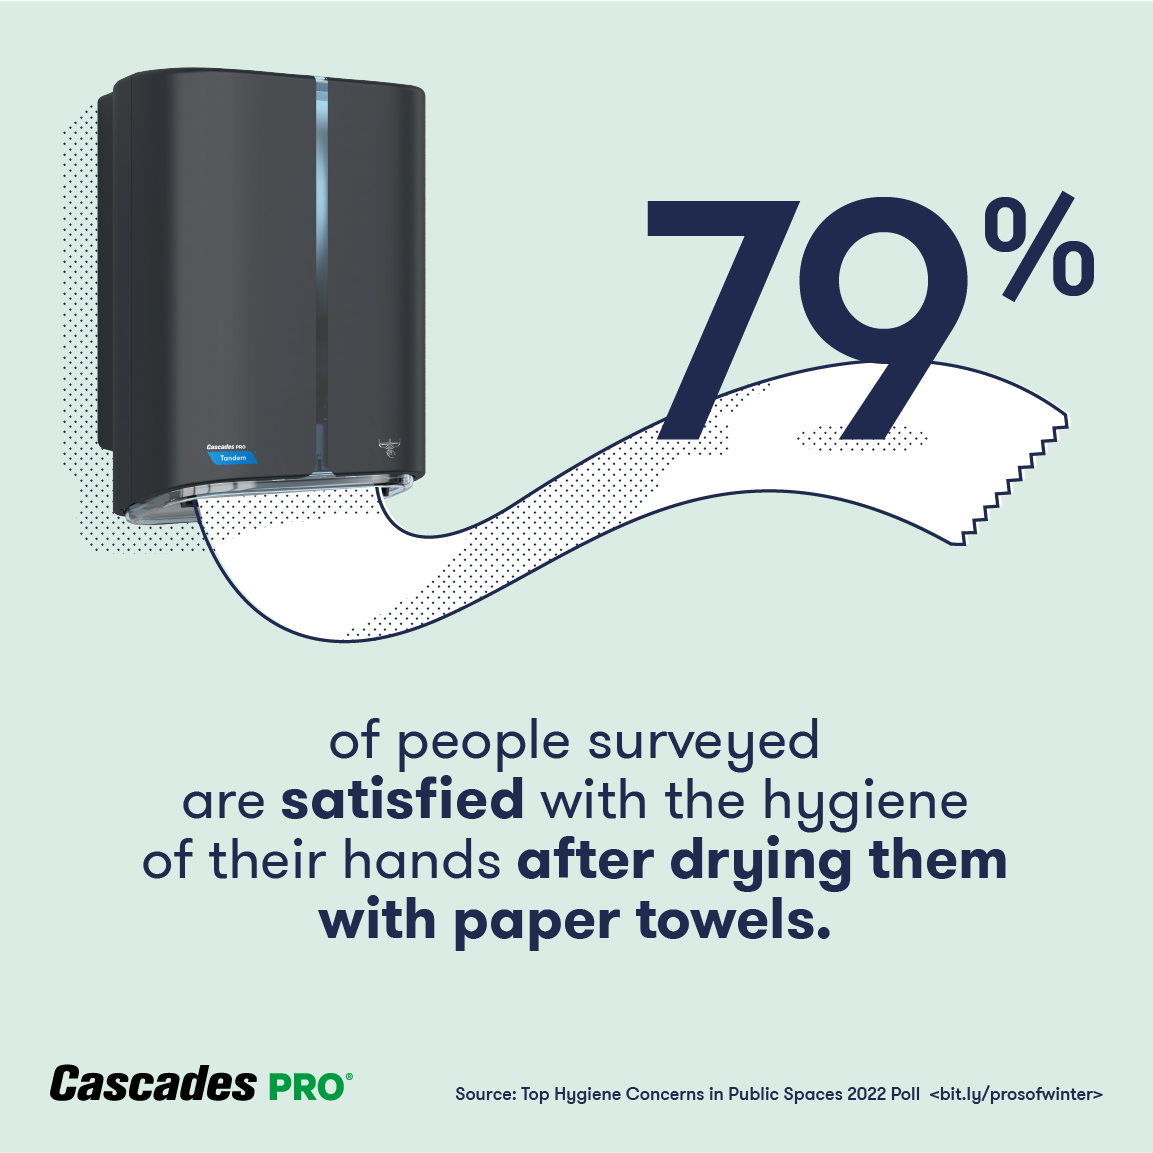 79% are satisfied with how clean hands feel after using paper towel.